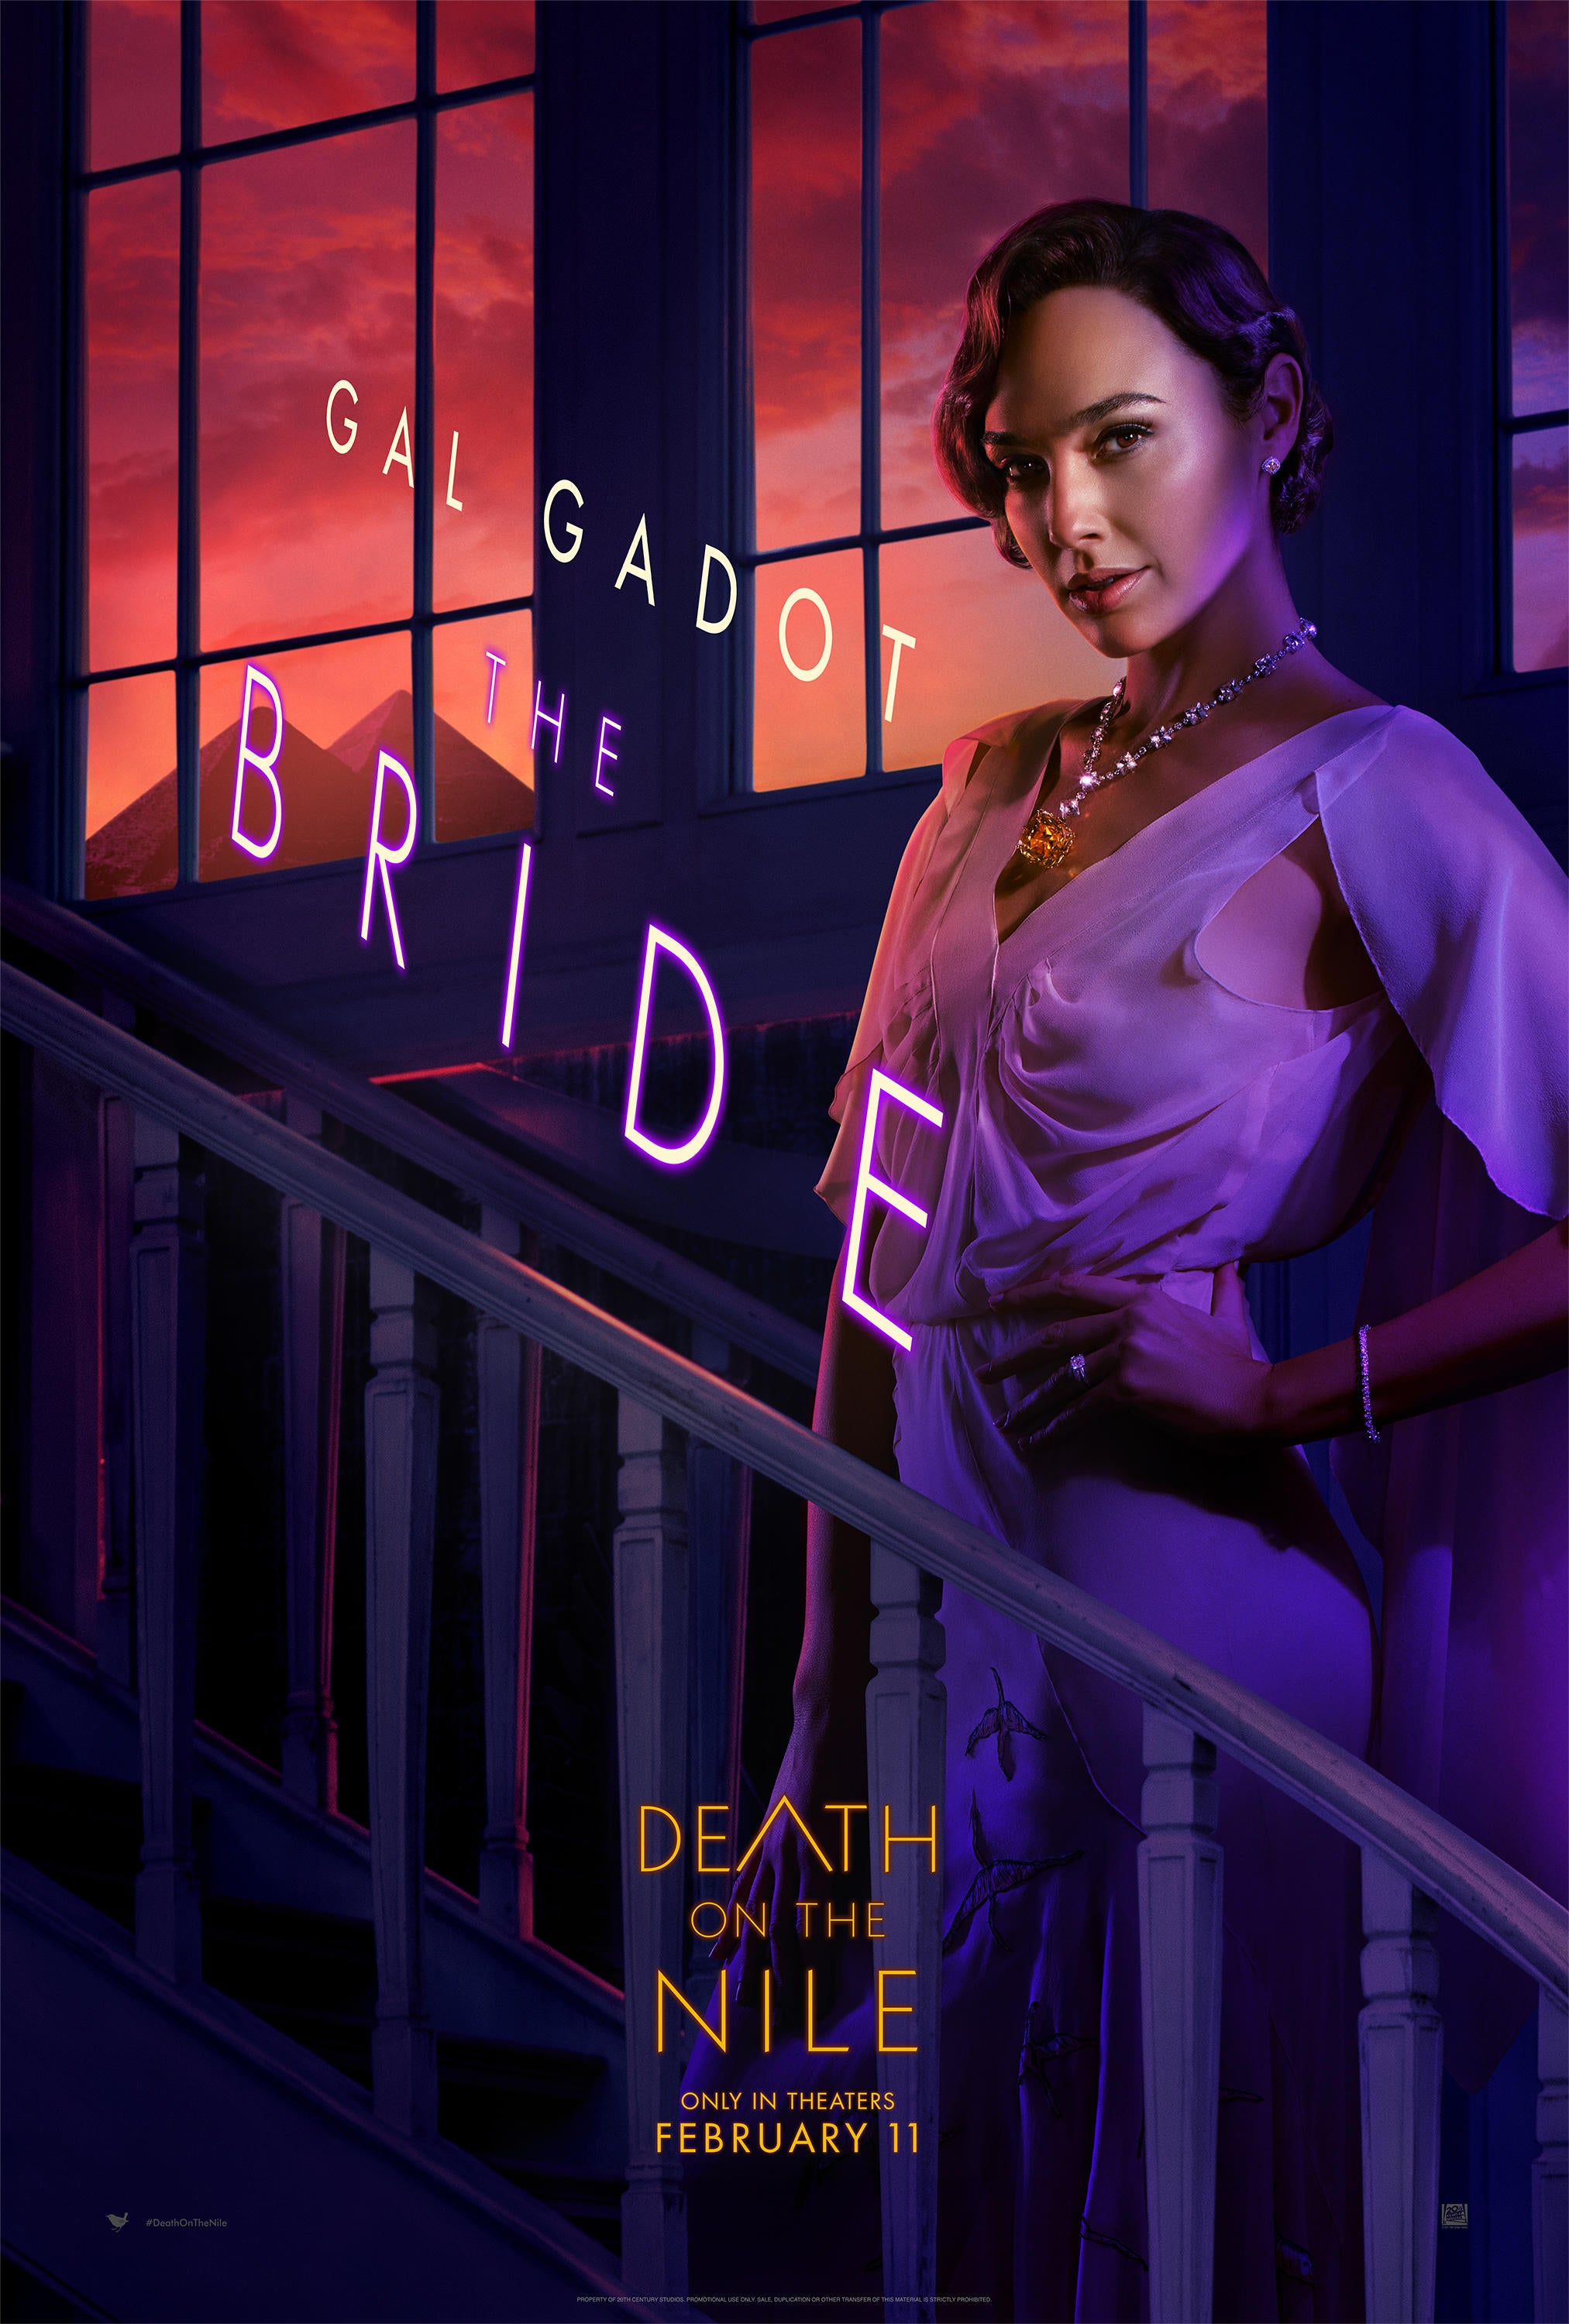 death-on-the-nile-remake-poster-gal-gadot.jpg